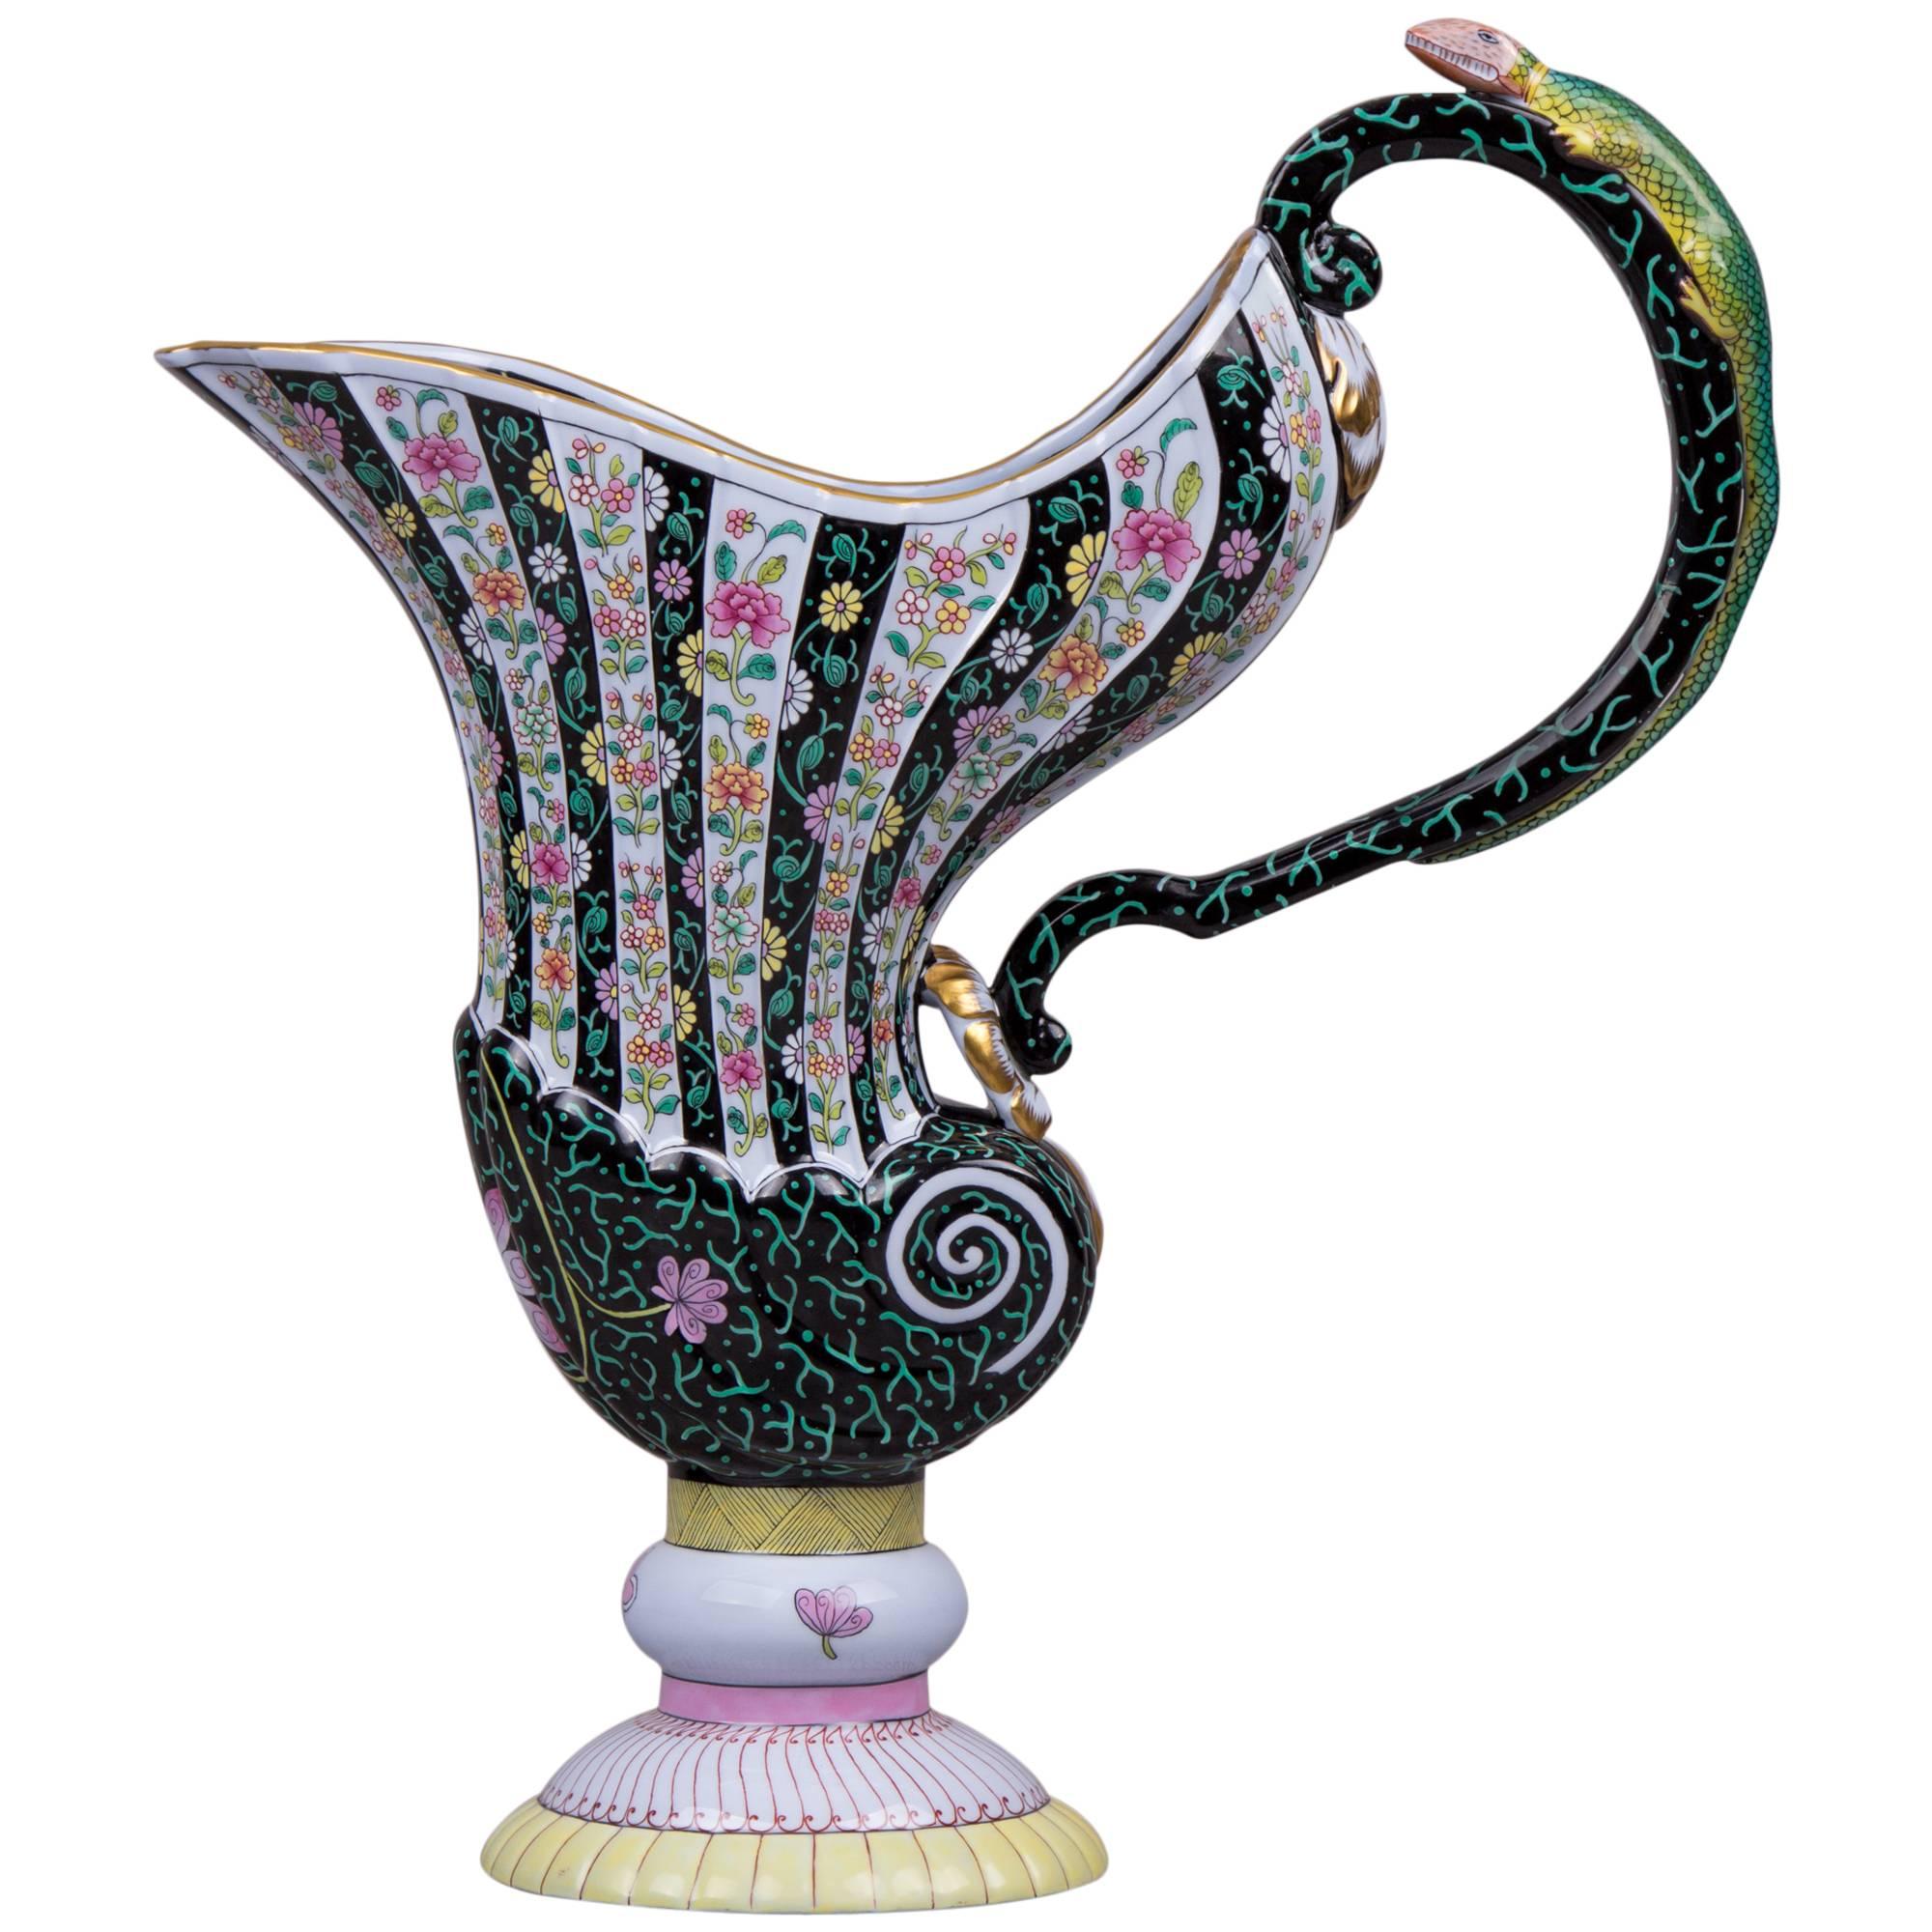 Herend Siang Noir Black Dynasty Water Pitcher with Lizard Handle, circa 1960 For Sale